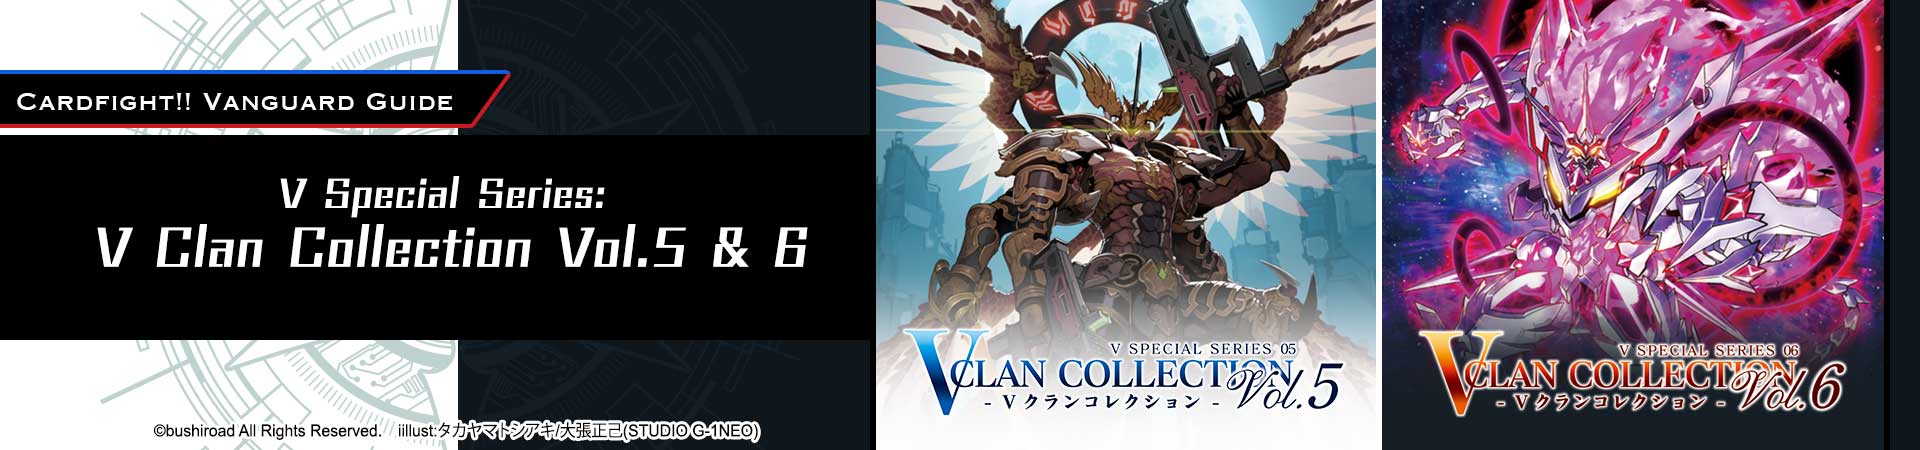  V Special Series: V Clan Collection Vol.5 and Vol.6 (Official Guide)